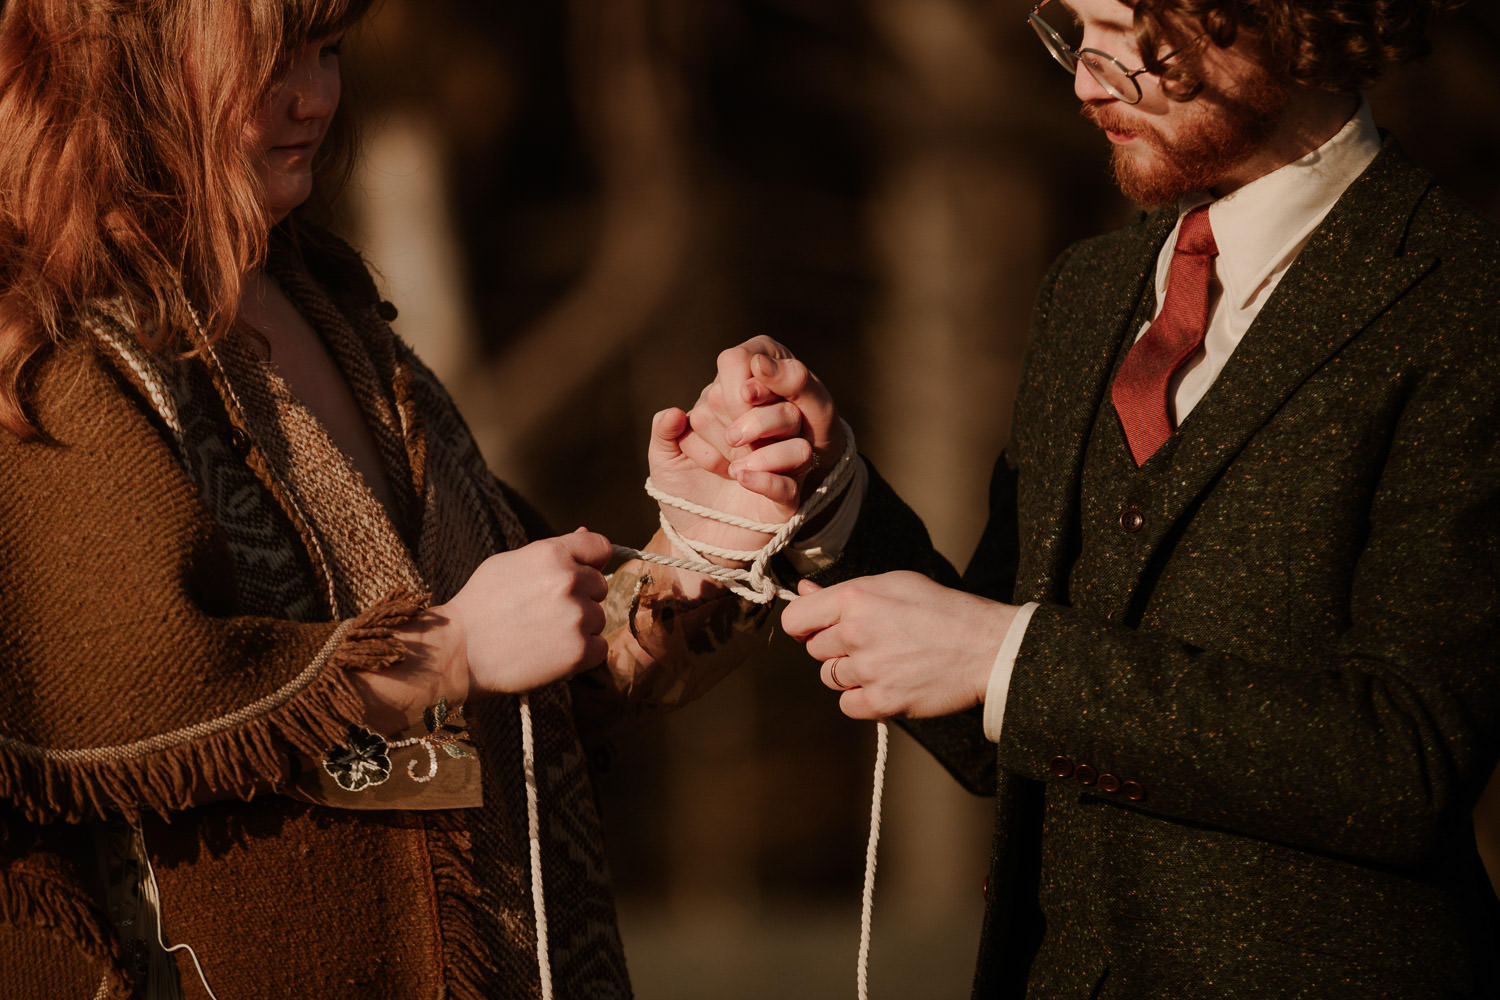 Eloping couple wrap a white cord around their hands in celtic hand fasting ceremony